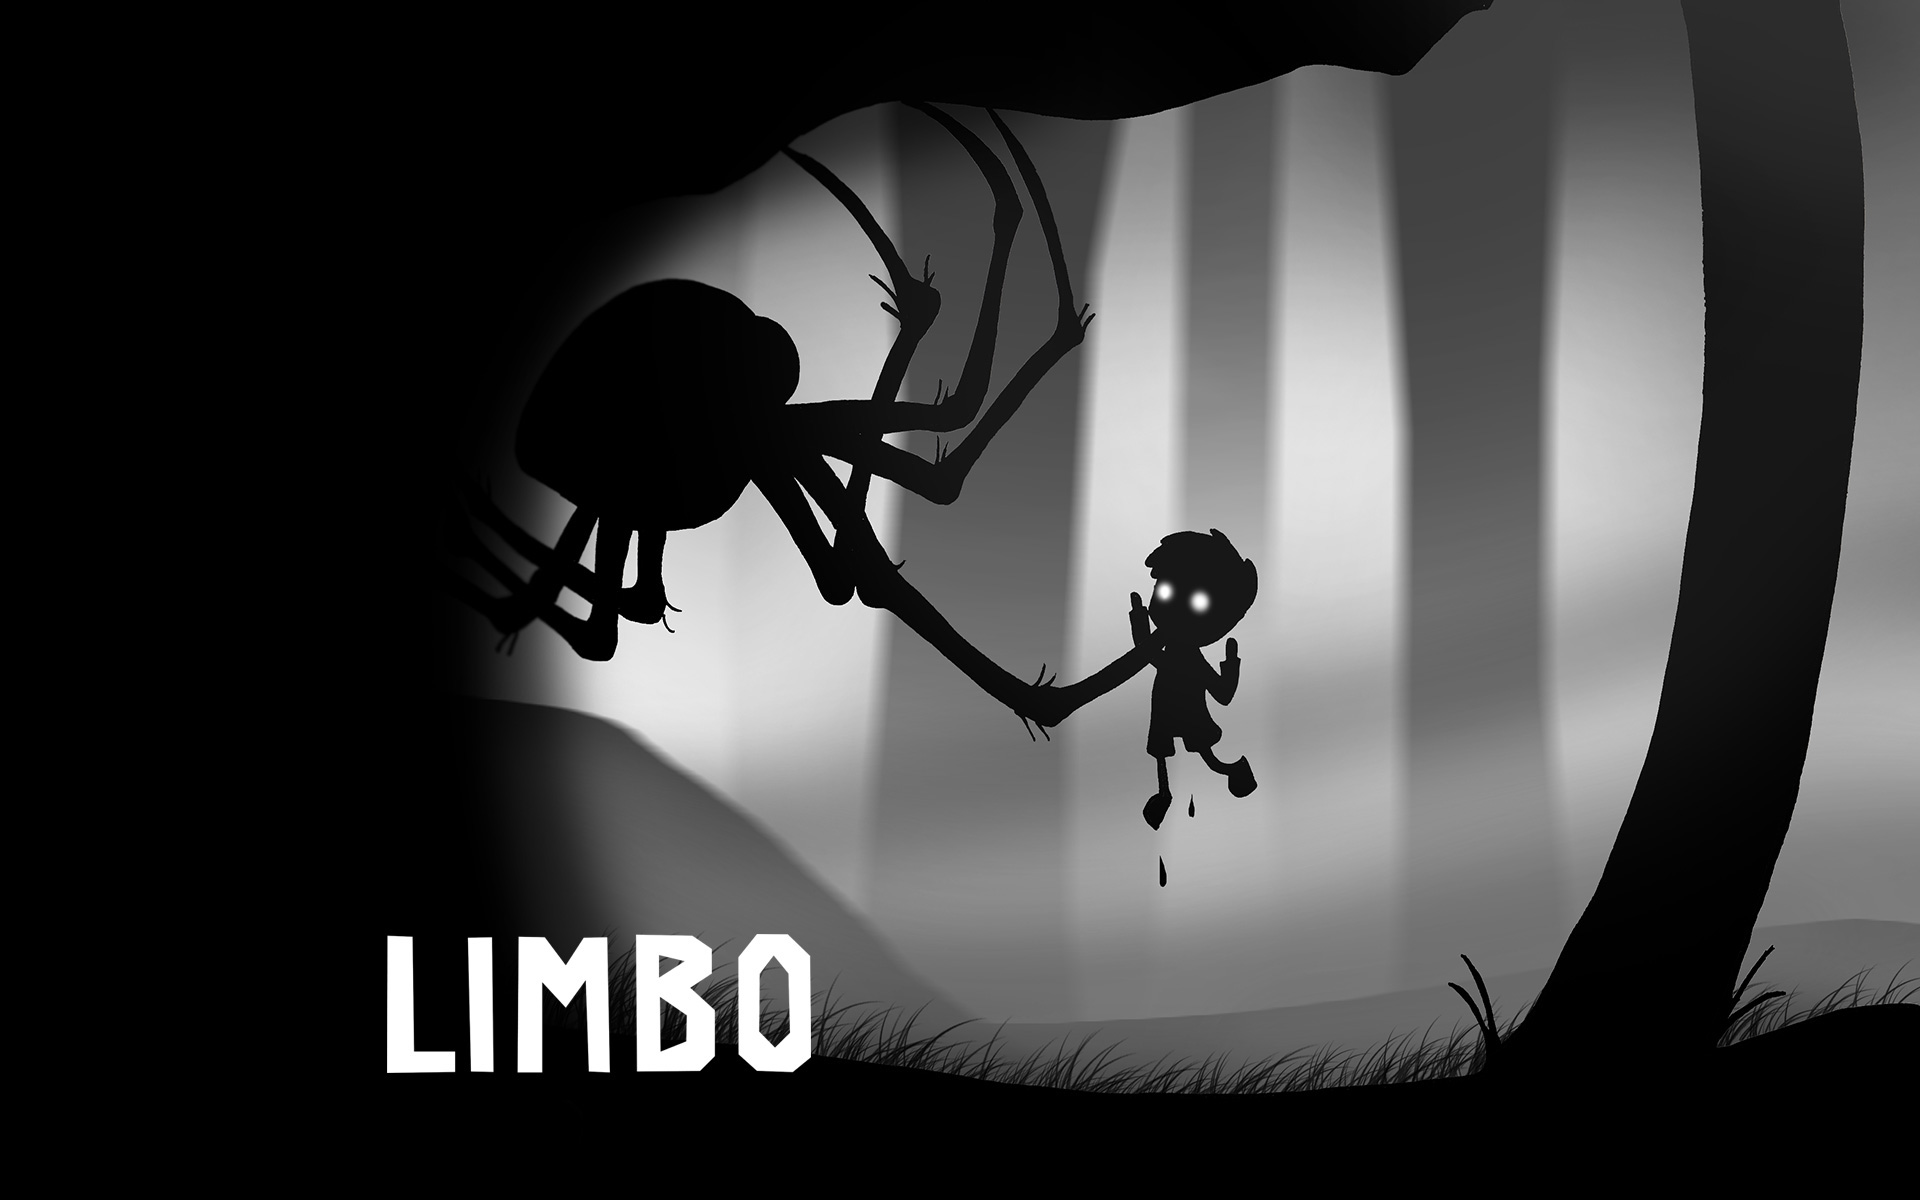 licence key to unlock limbo game for kids